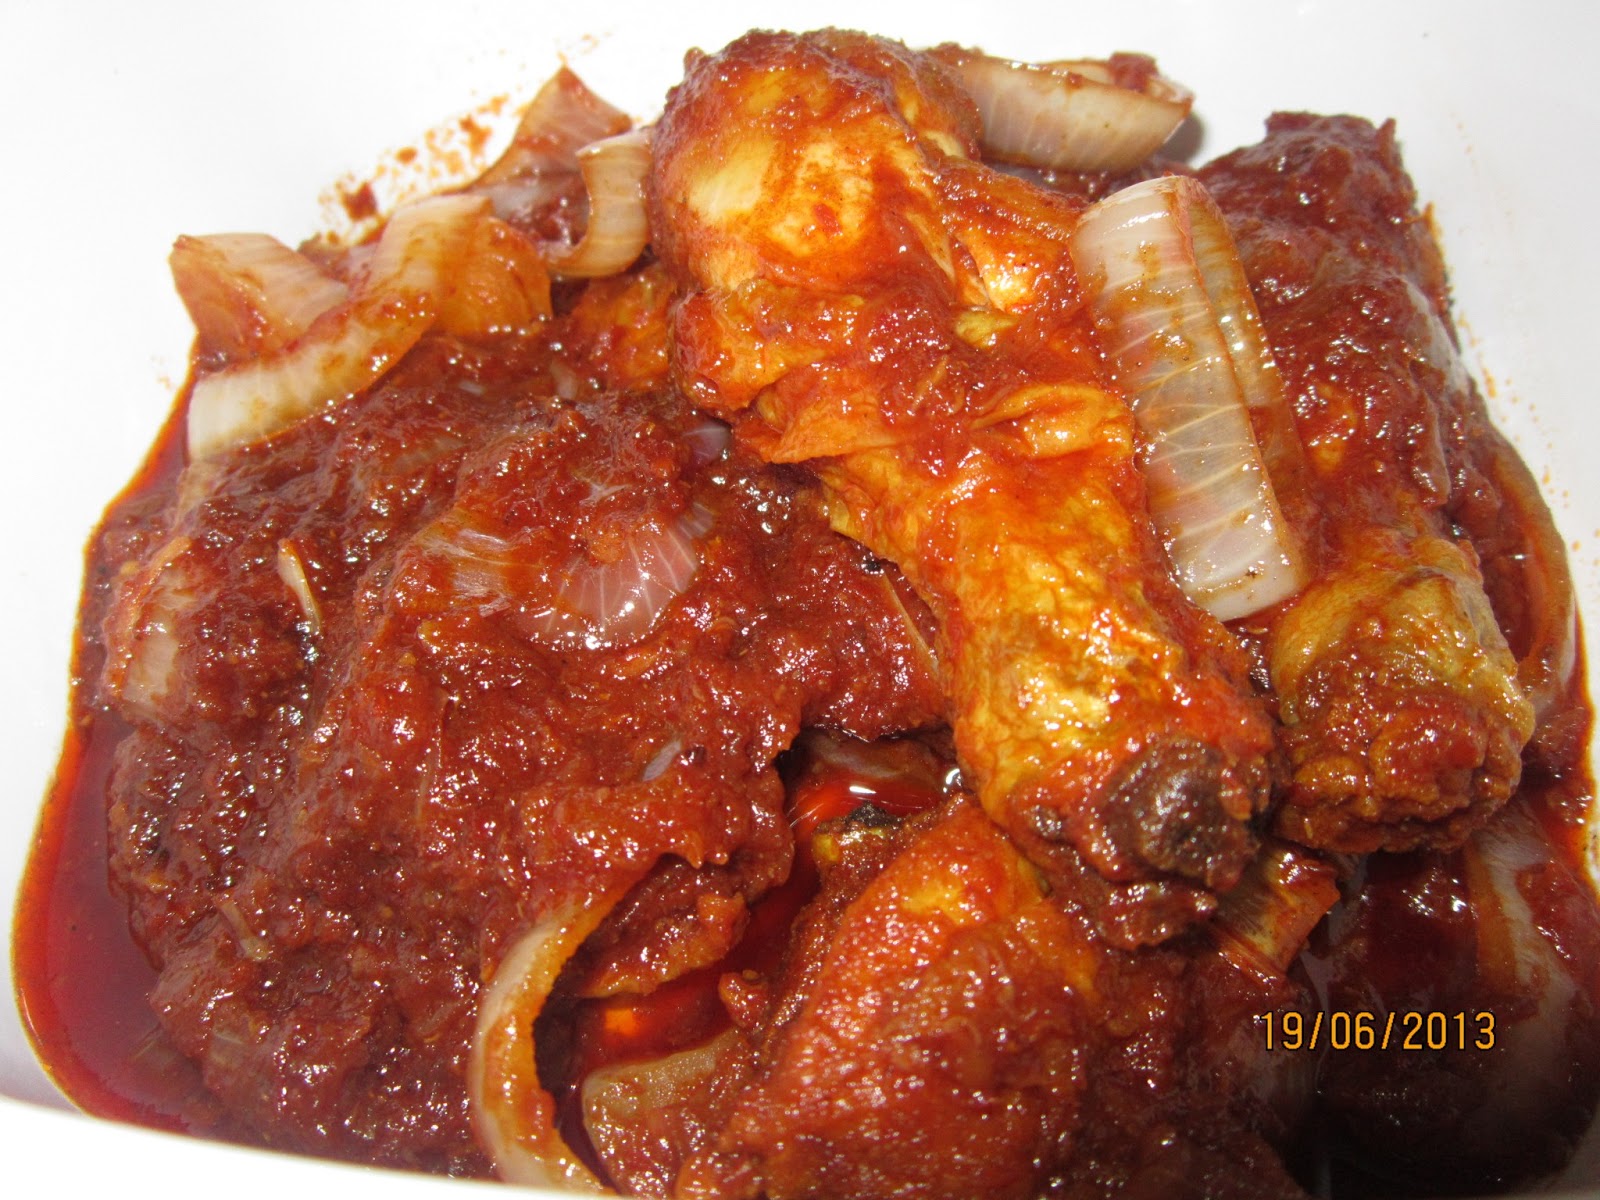 Demi segulung diploma bloggurrr!!!! HOW TO COOK SPICY CHICKEN SAMBAL